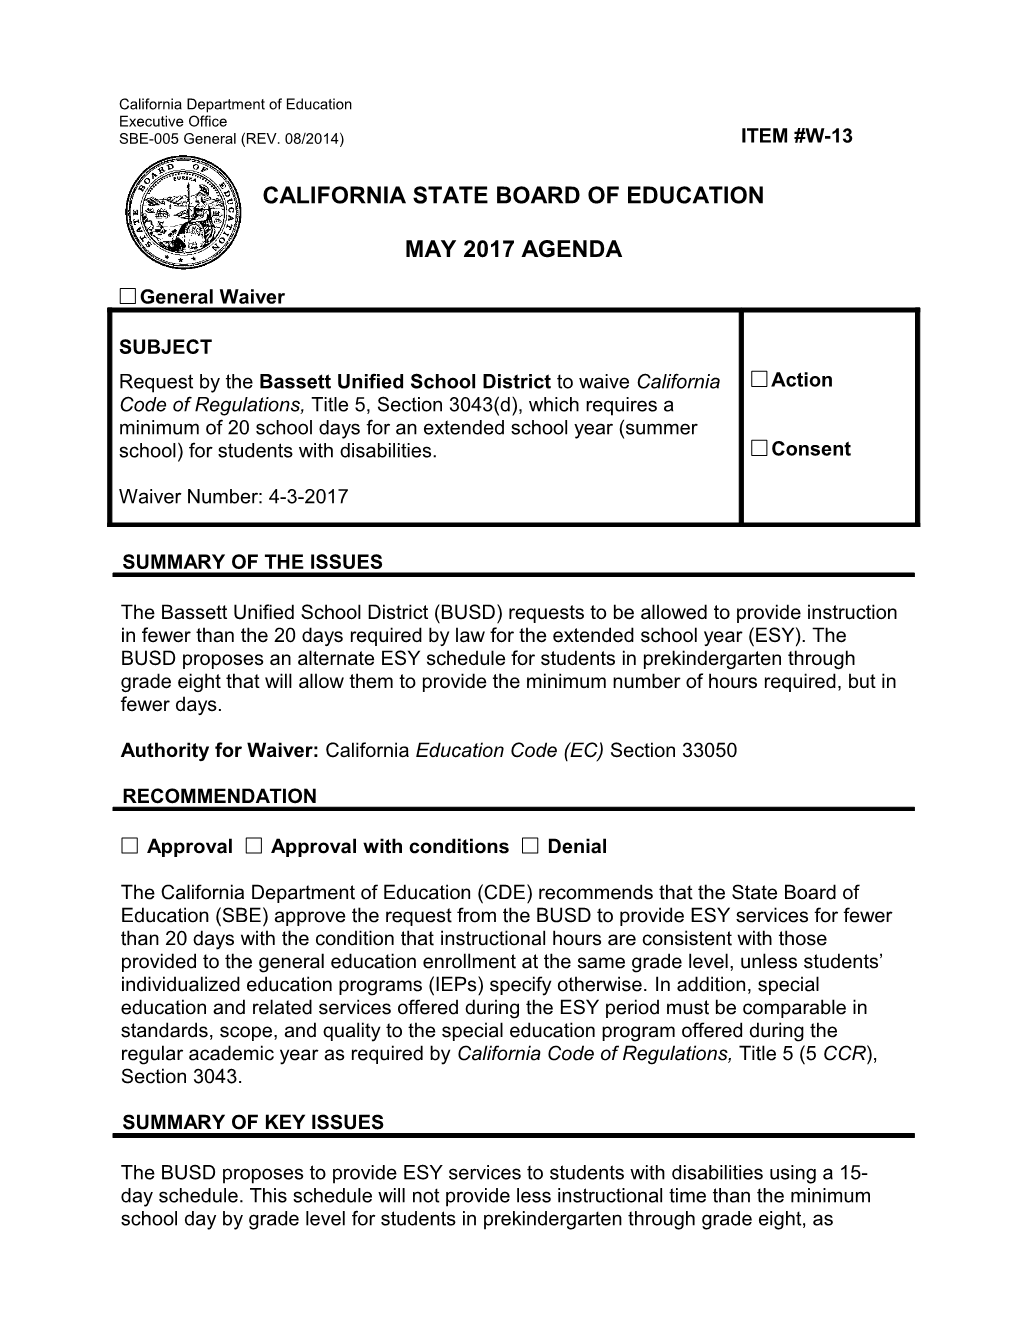 May 2017 Agenda Item W-13 - Meeting Agendas (CA State Board of Education)